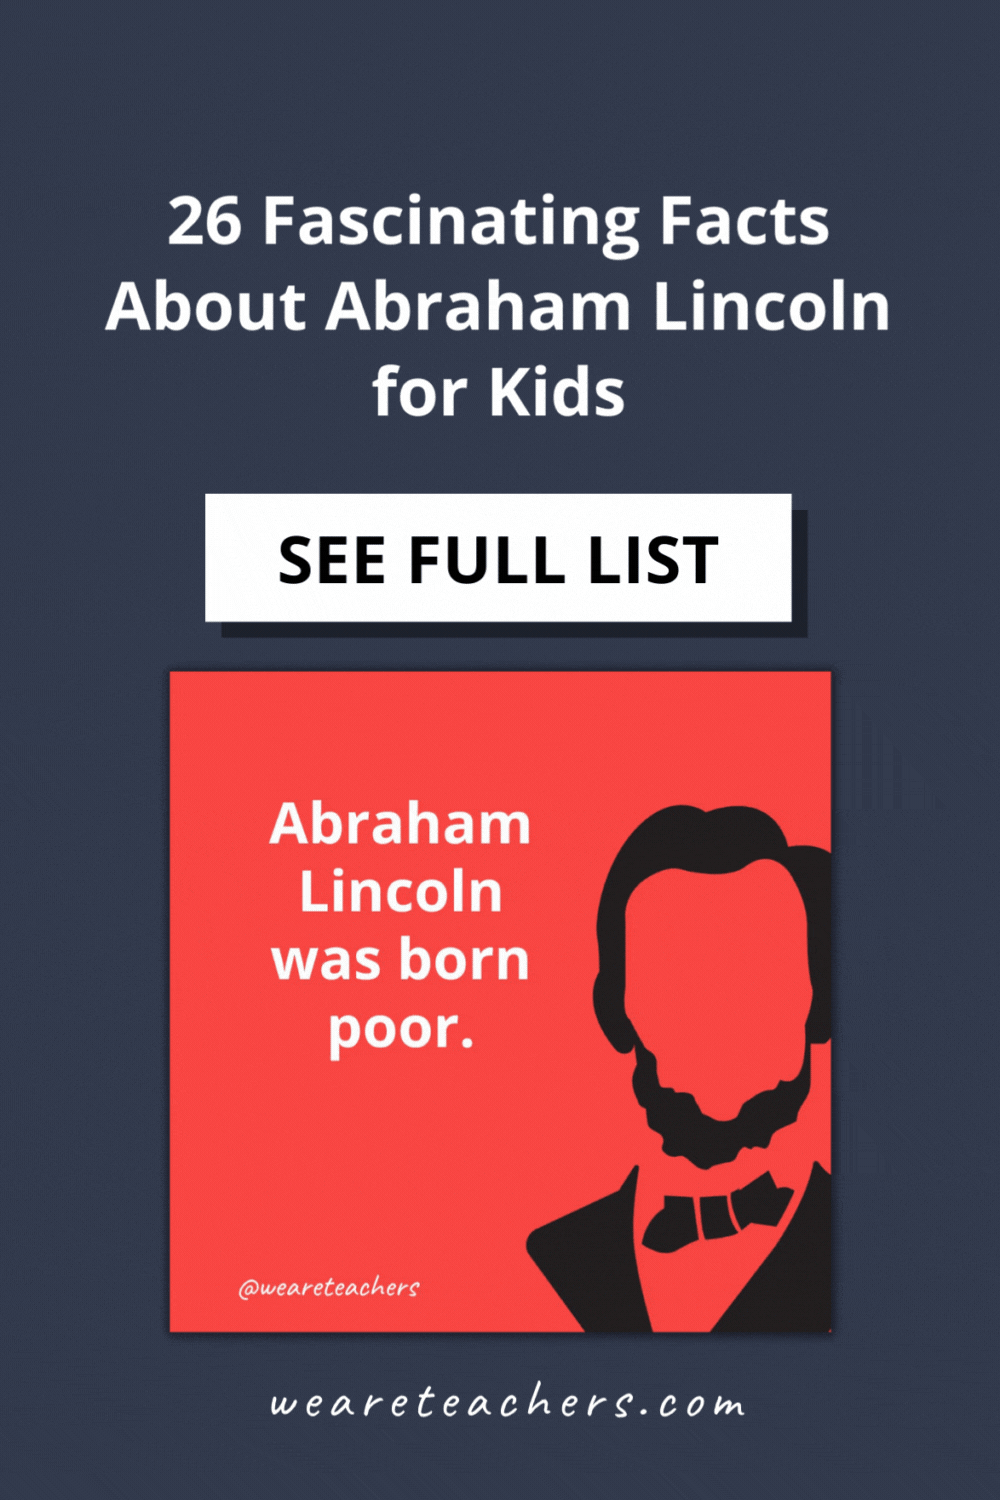 It's been more than 150 years since he was president, which is exactly why these facts about Abraham Lincoln should be shared with kids!